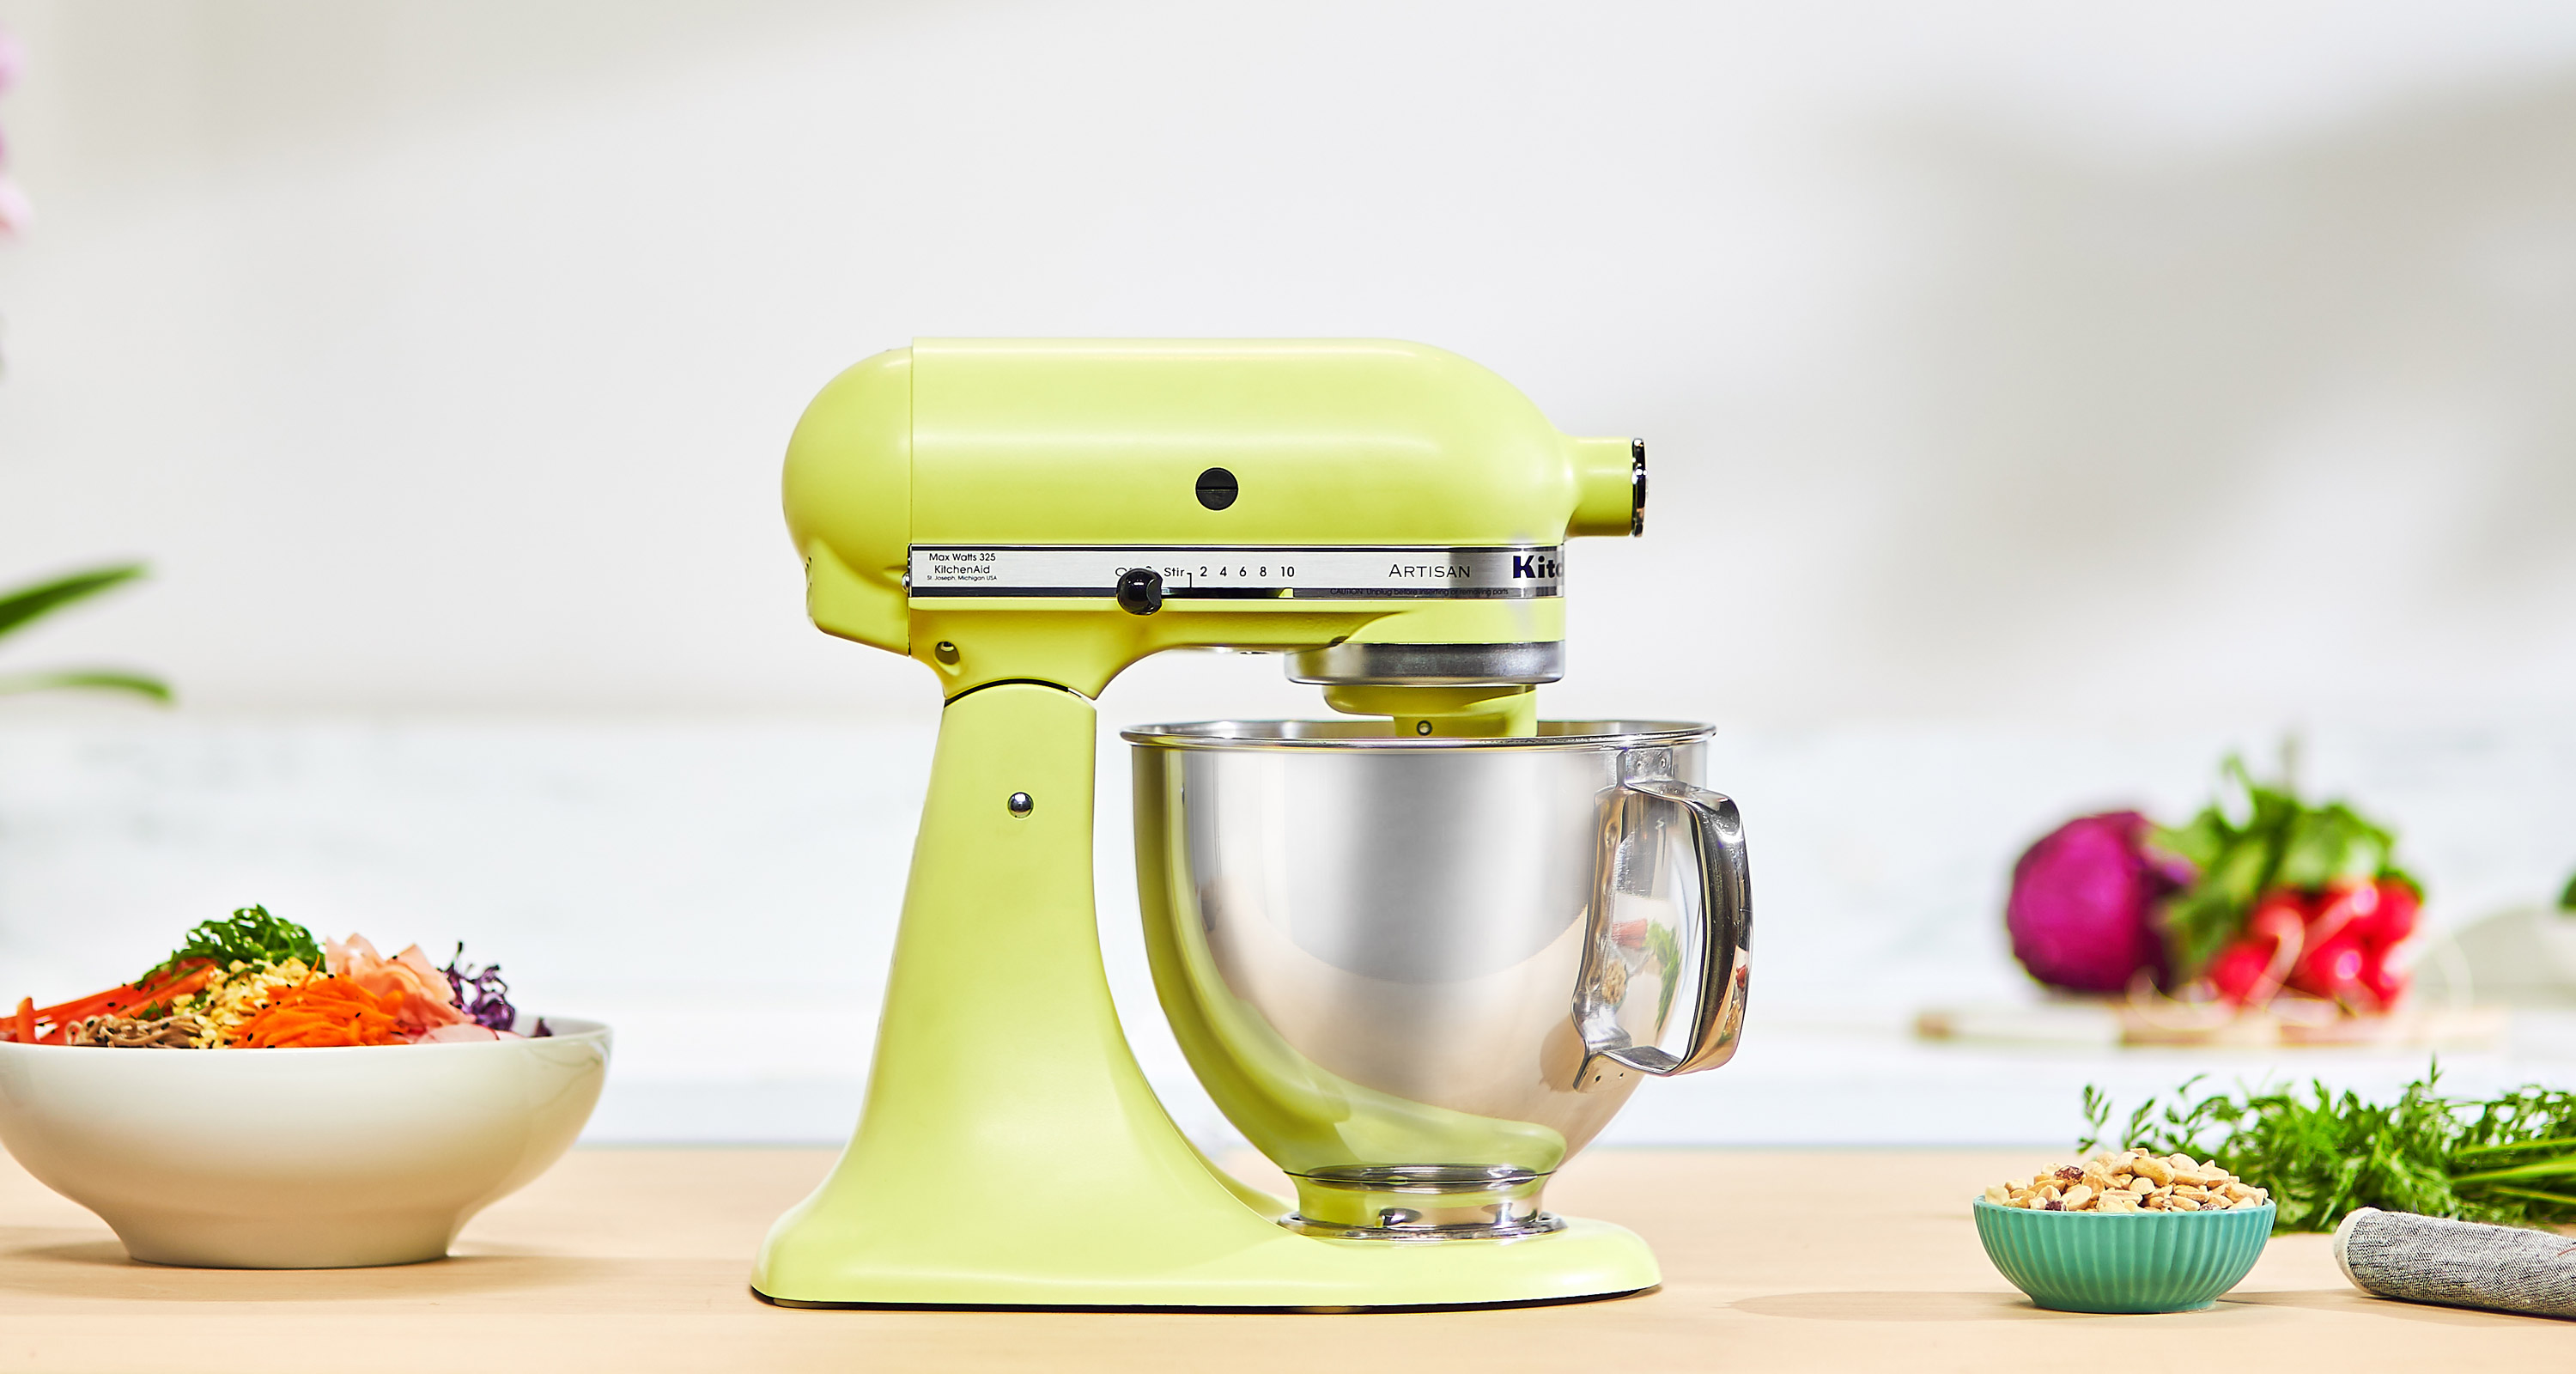 Kitchenaid Sale The Best Kitchenaid Deals On Stand Mixers Kettles And More Homes Gardens